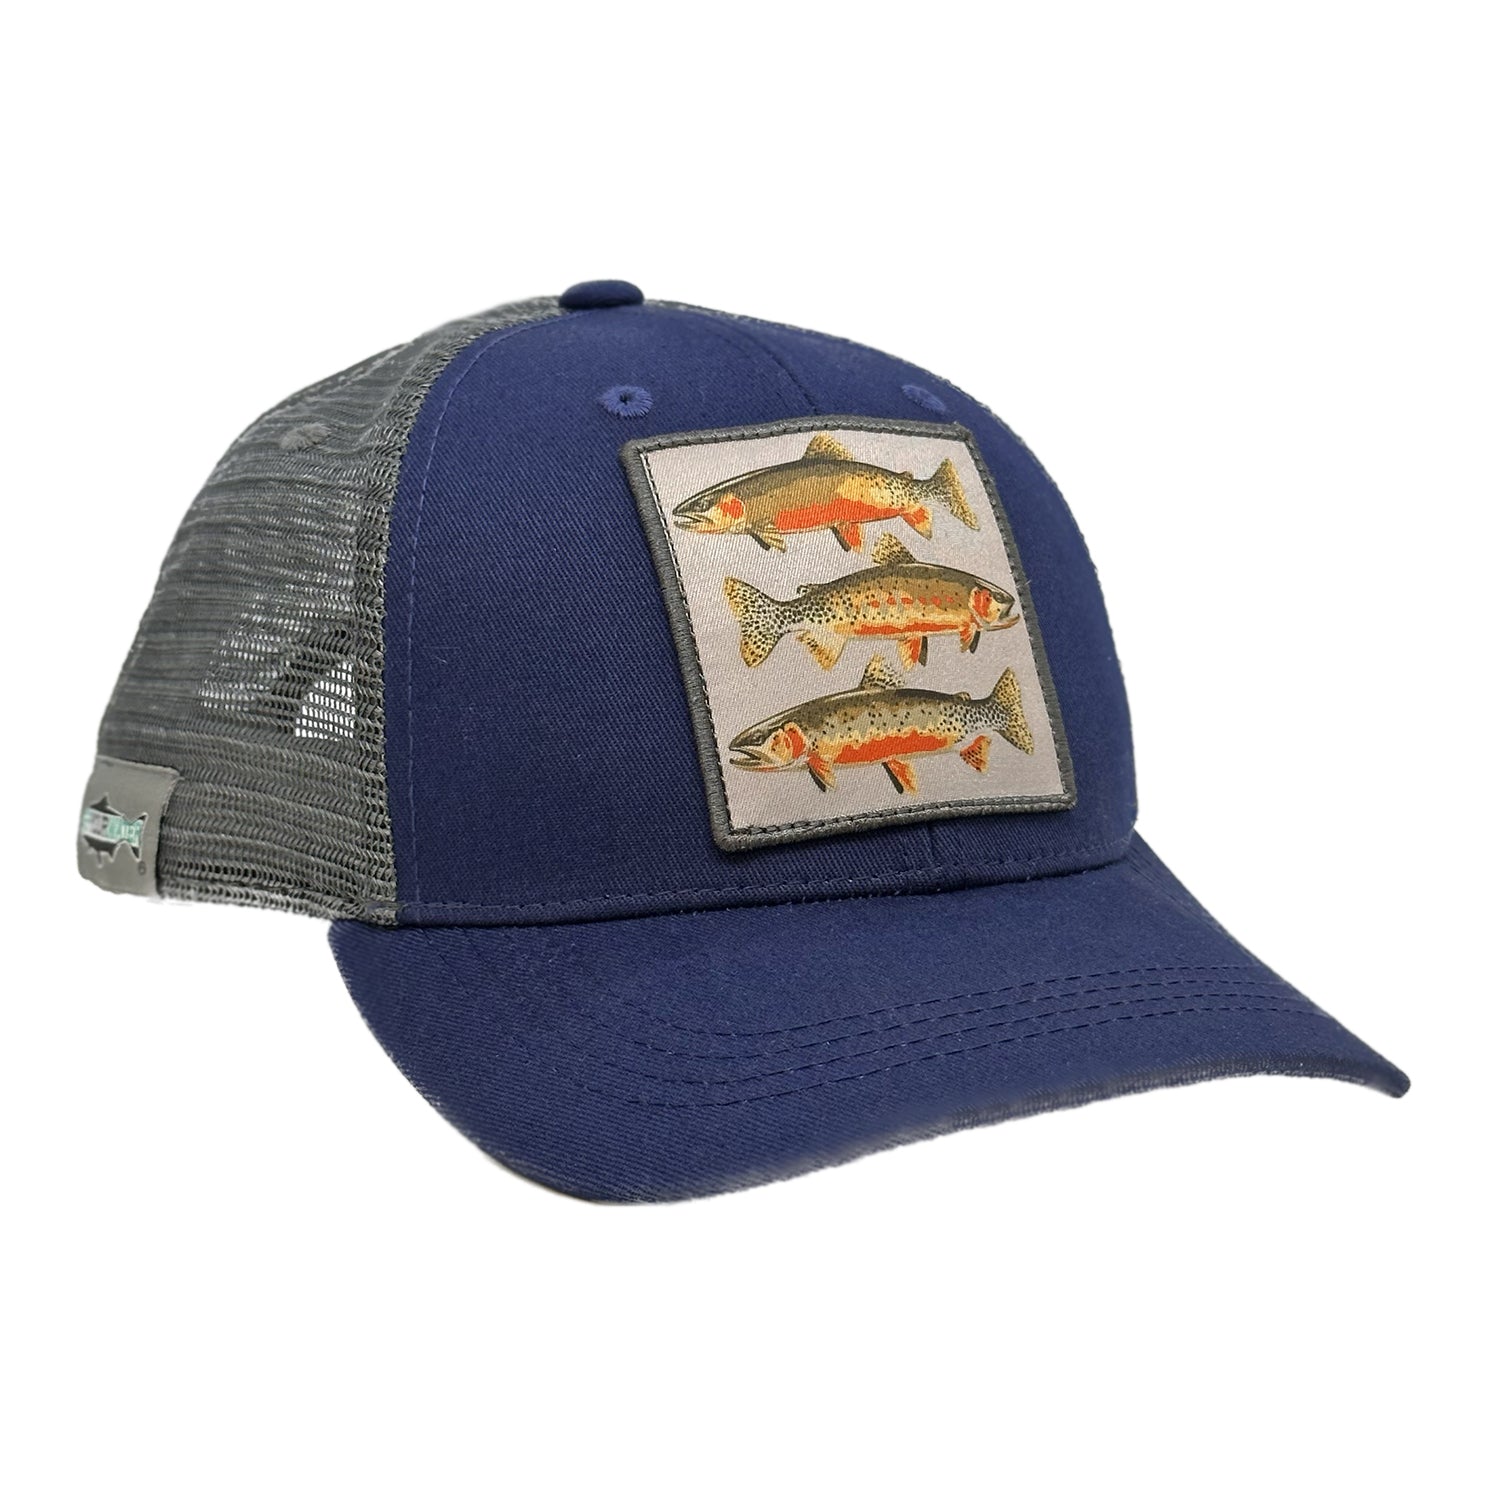 Rep Your Water Western Native Trout Hat